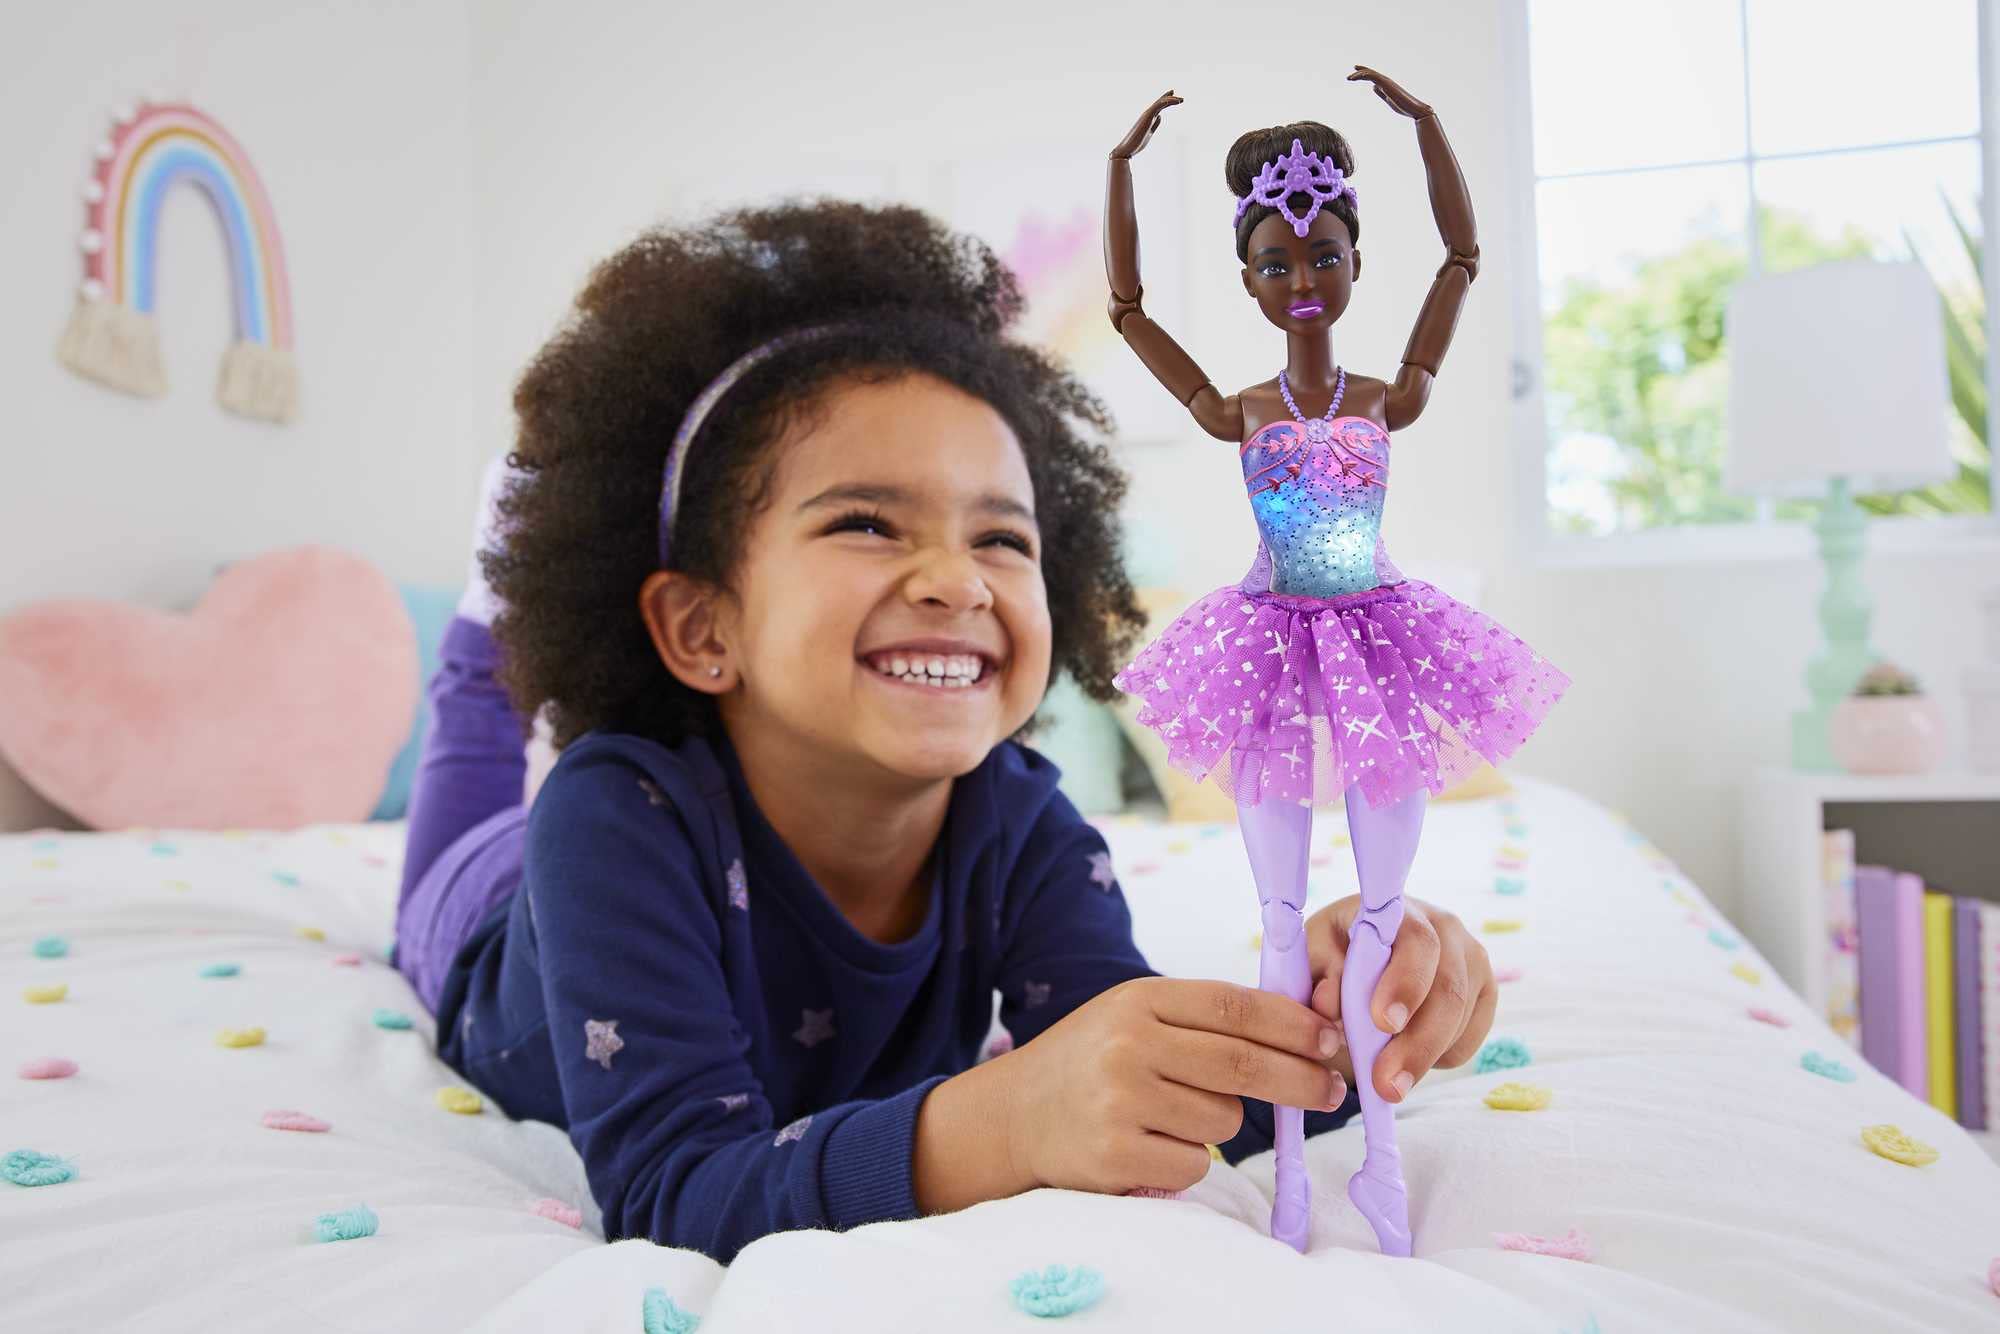 Barbie Dreamtopia Doll, Twinkle Lights Posable Ballerina with 5 Light-Up Shows, Sparkly Purple Tutu, Black Hair & Tiara